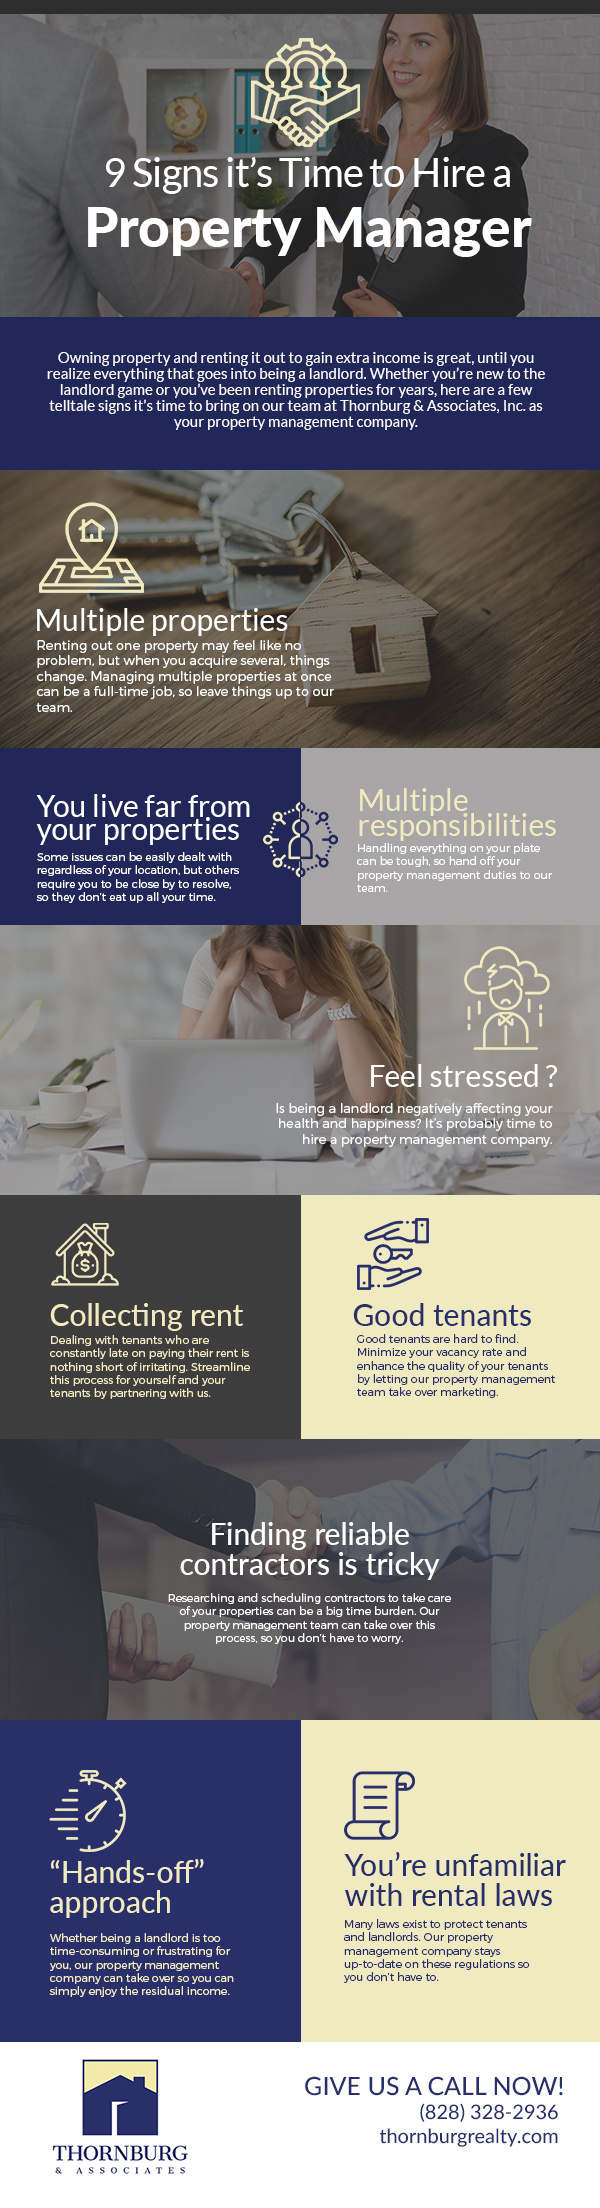 9 Signs it’s Time to Hire a Property Manager [infographic]